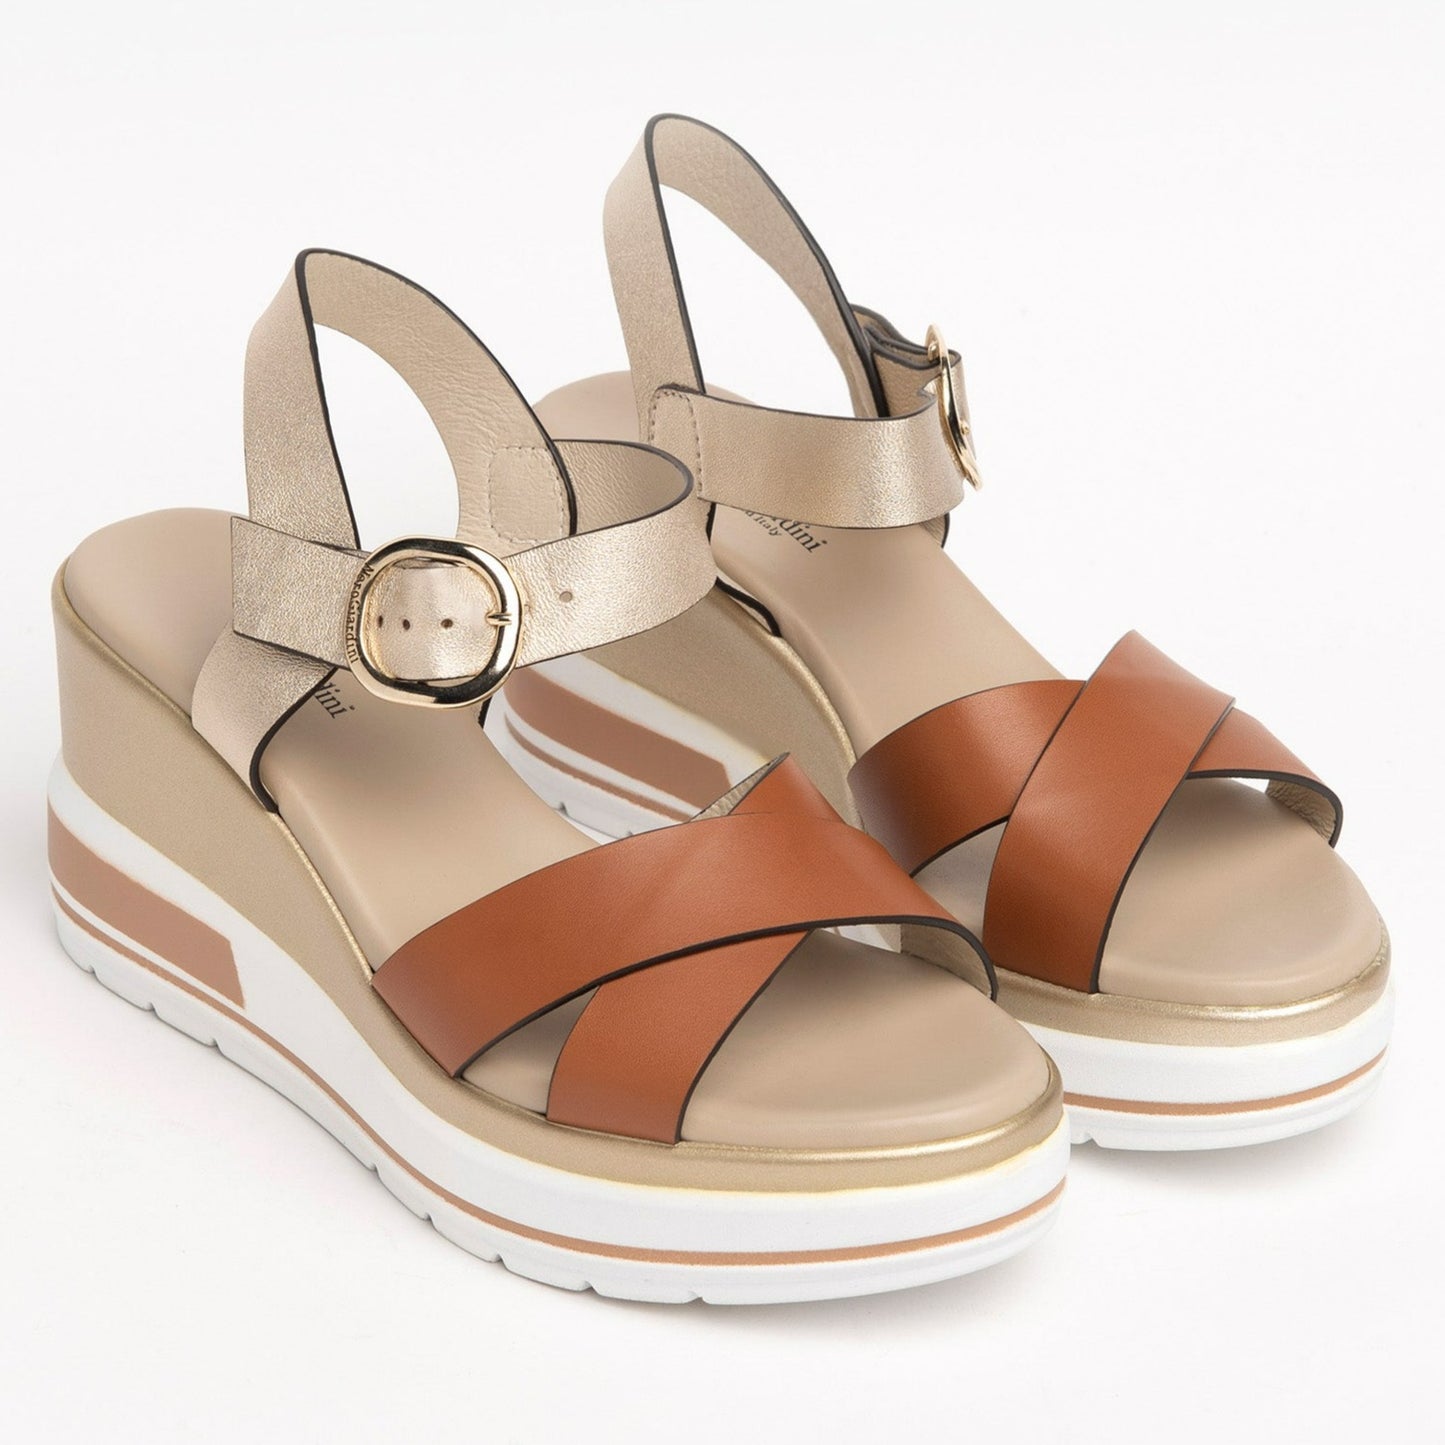 Sandals NeroGiardini women brown and gold leather wedge